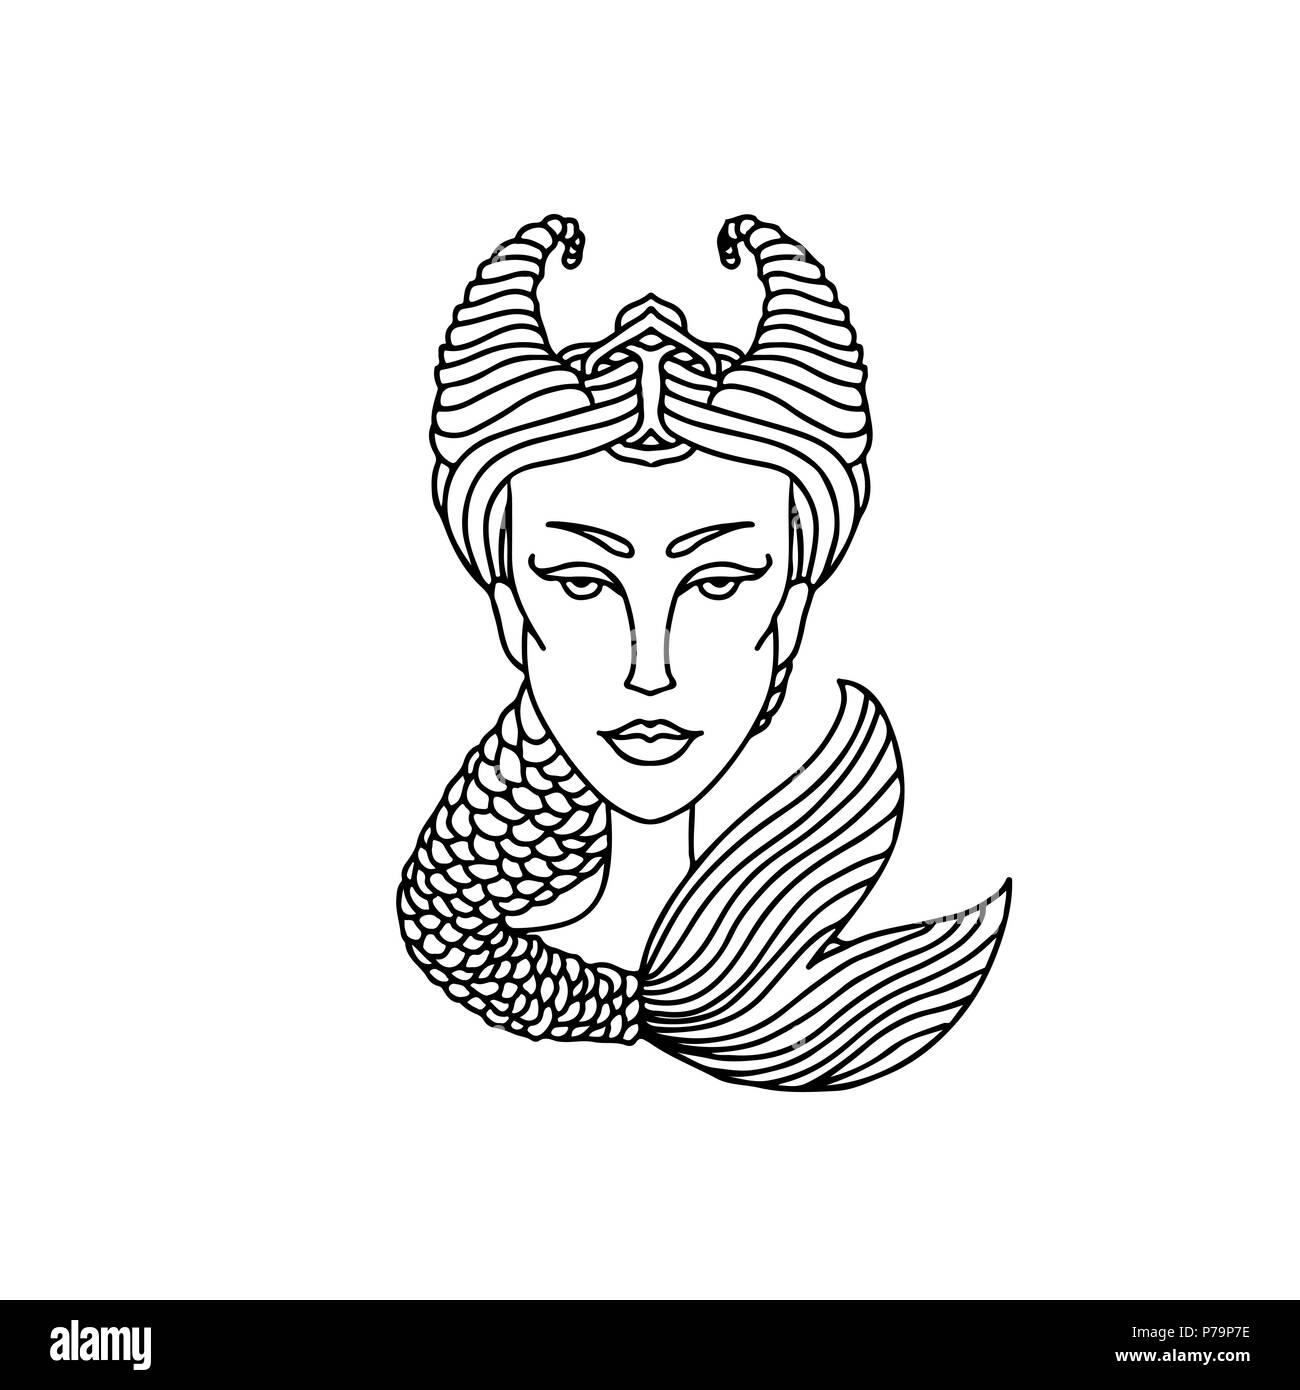 Capricorn girl portrait. Zodiac sign for adult coloring book. Simple black and white vector illustration. Stock Vector